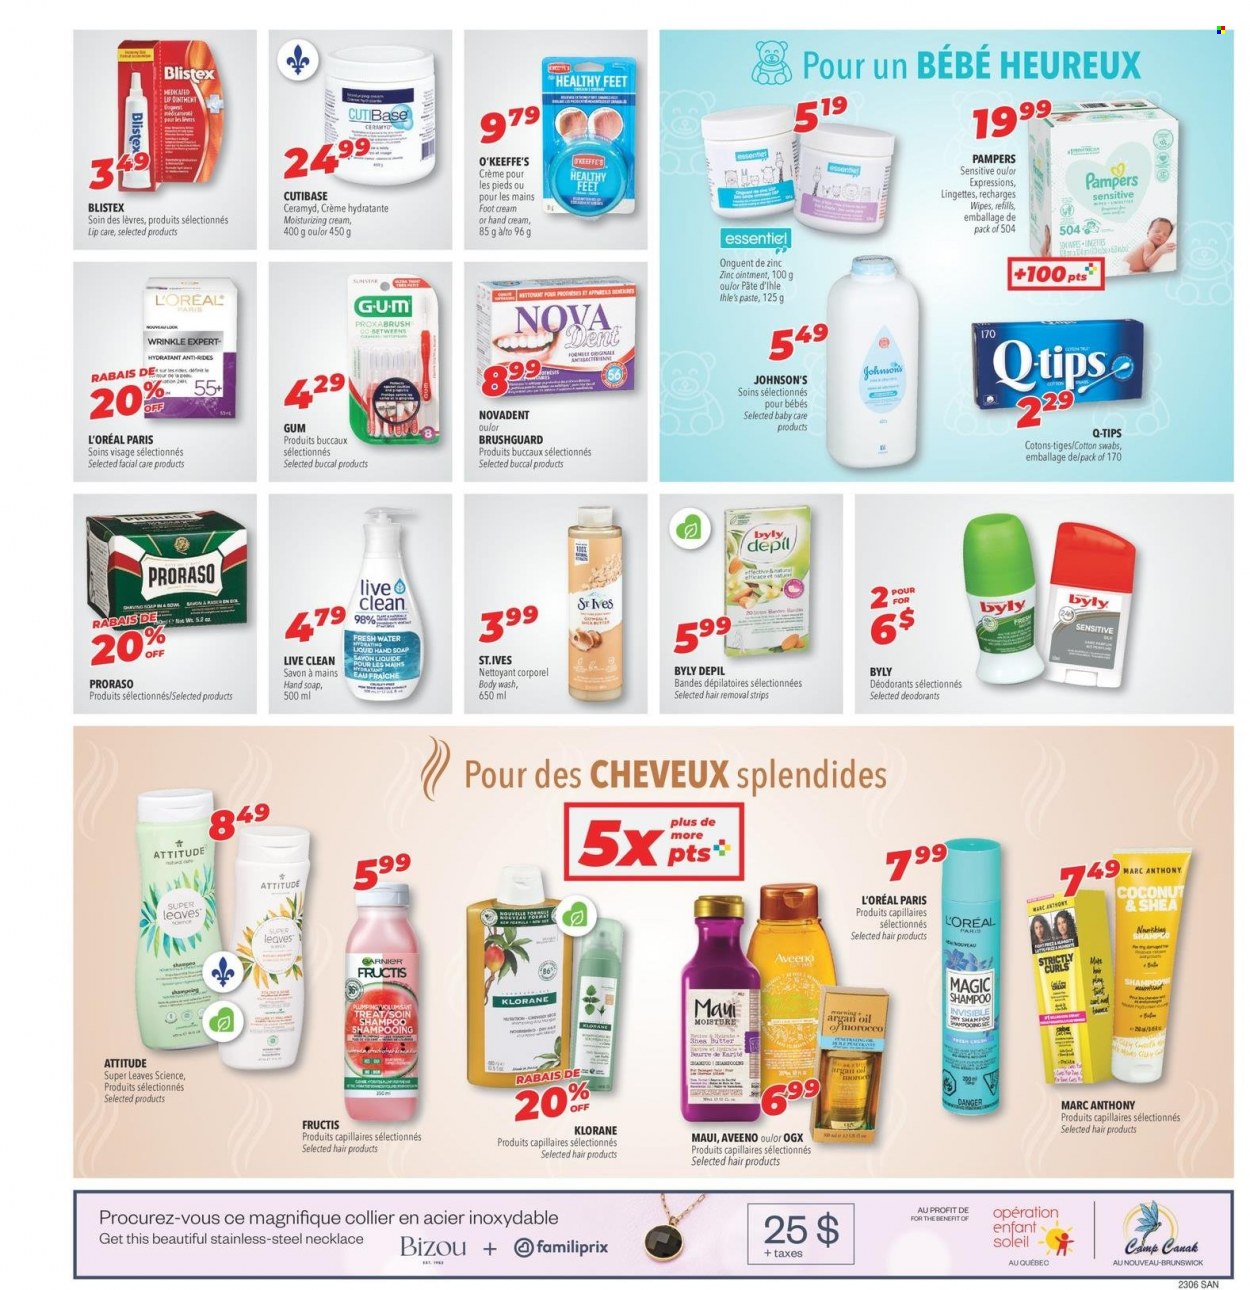 thumbnail - Familiprix Santé Flyer - February 02, 2023 - February 08, 2023 - Sales products - wipes, Pampers, Johnson's, Aveeno, ointment, Fab, Bounce, body wash, hand soap, soap, L’Oréal, OGX, Klorane, Maui Moisture, Fructis, shea butter, hand cream, hair removal, argan oil, Garnier, shampoo, deodorant. Page 4.